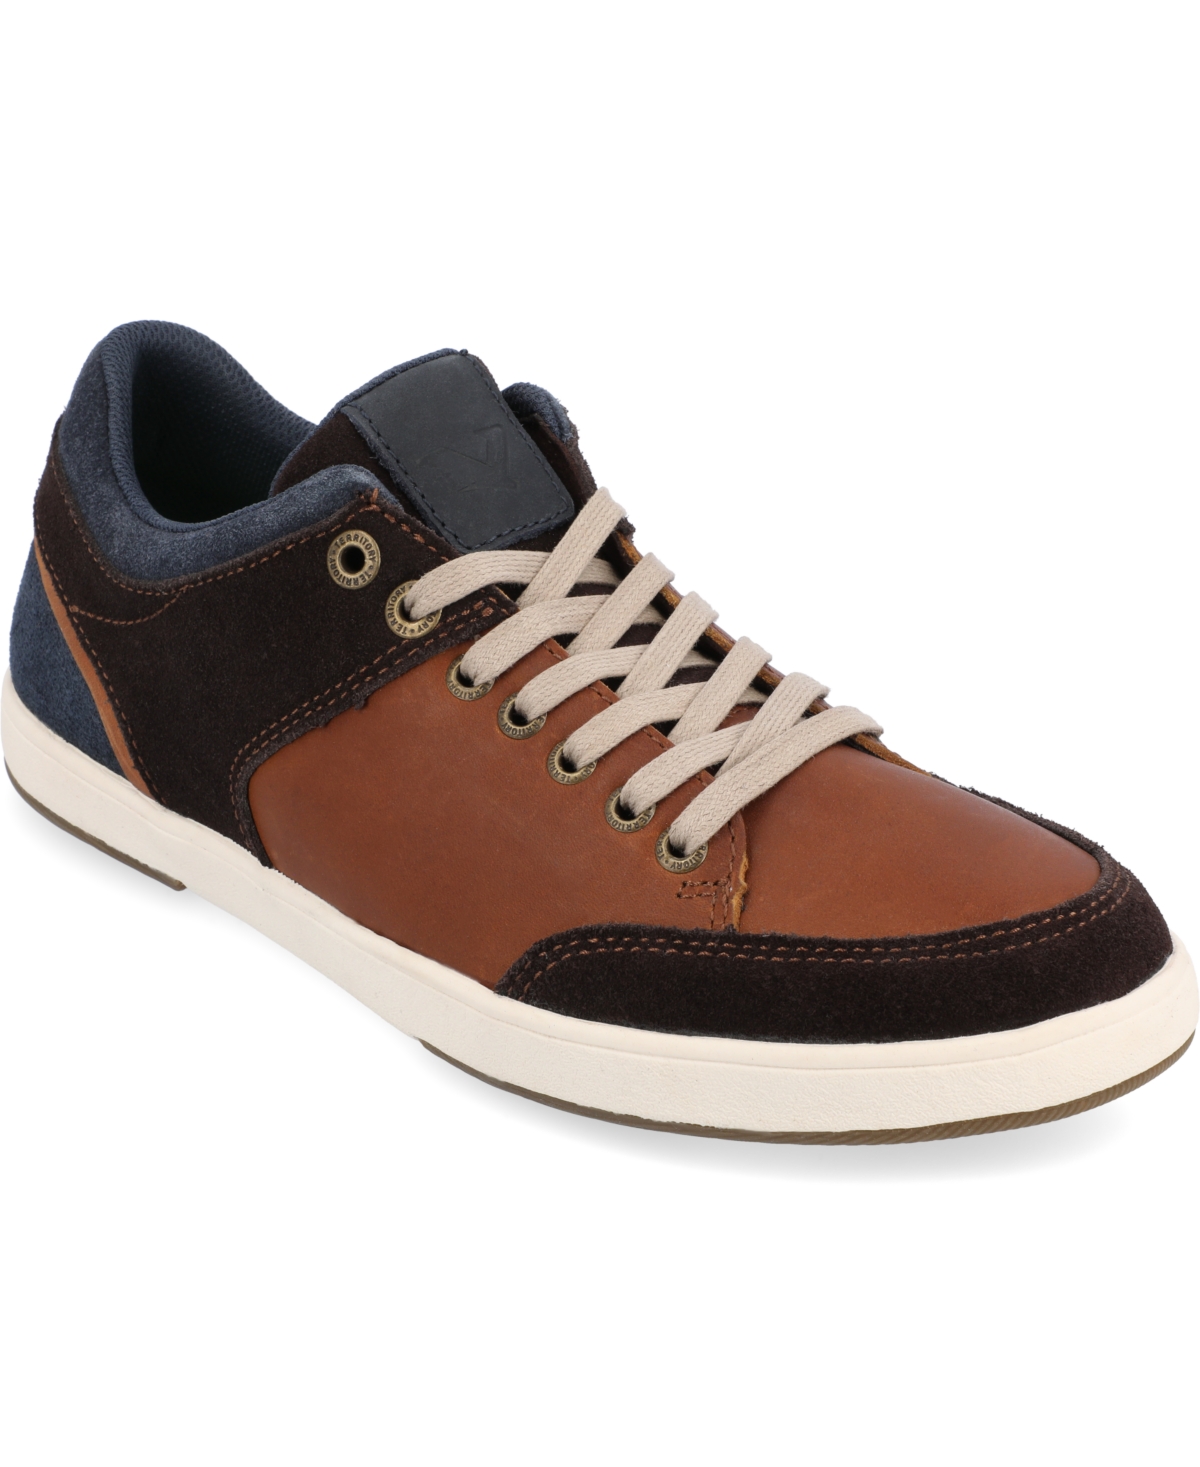 Men's Pacer Casual Leather Sneakers - Gray